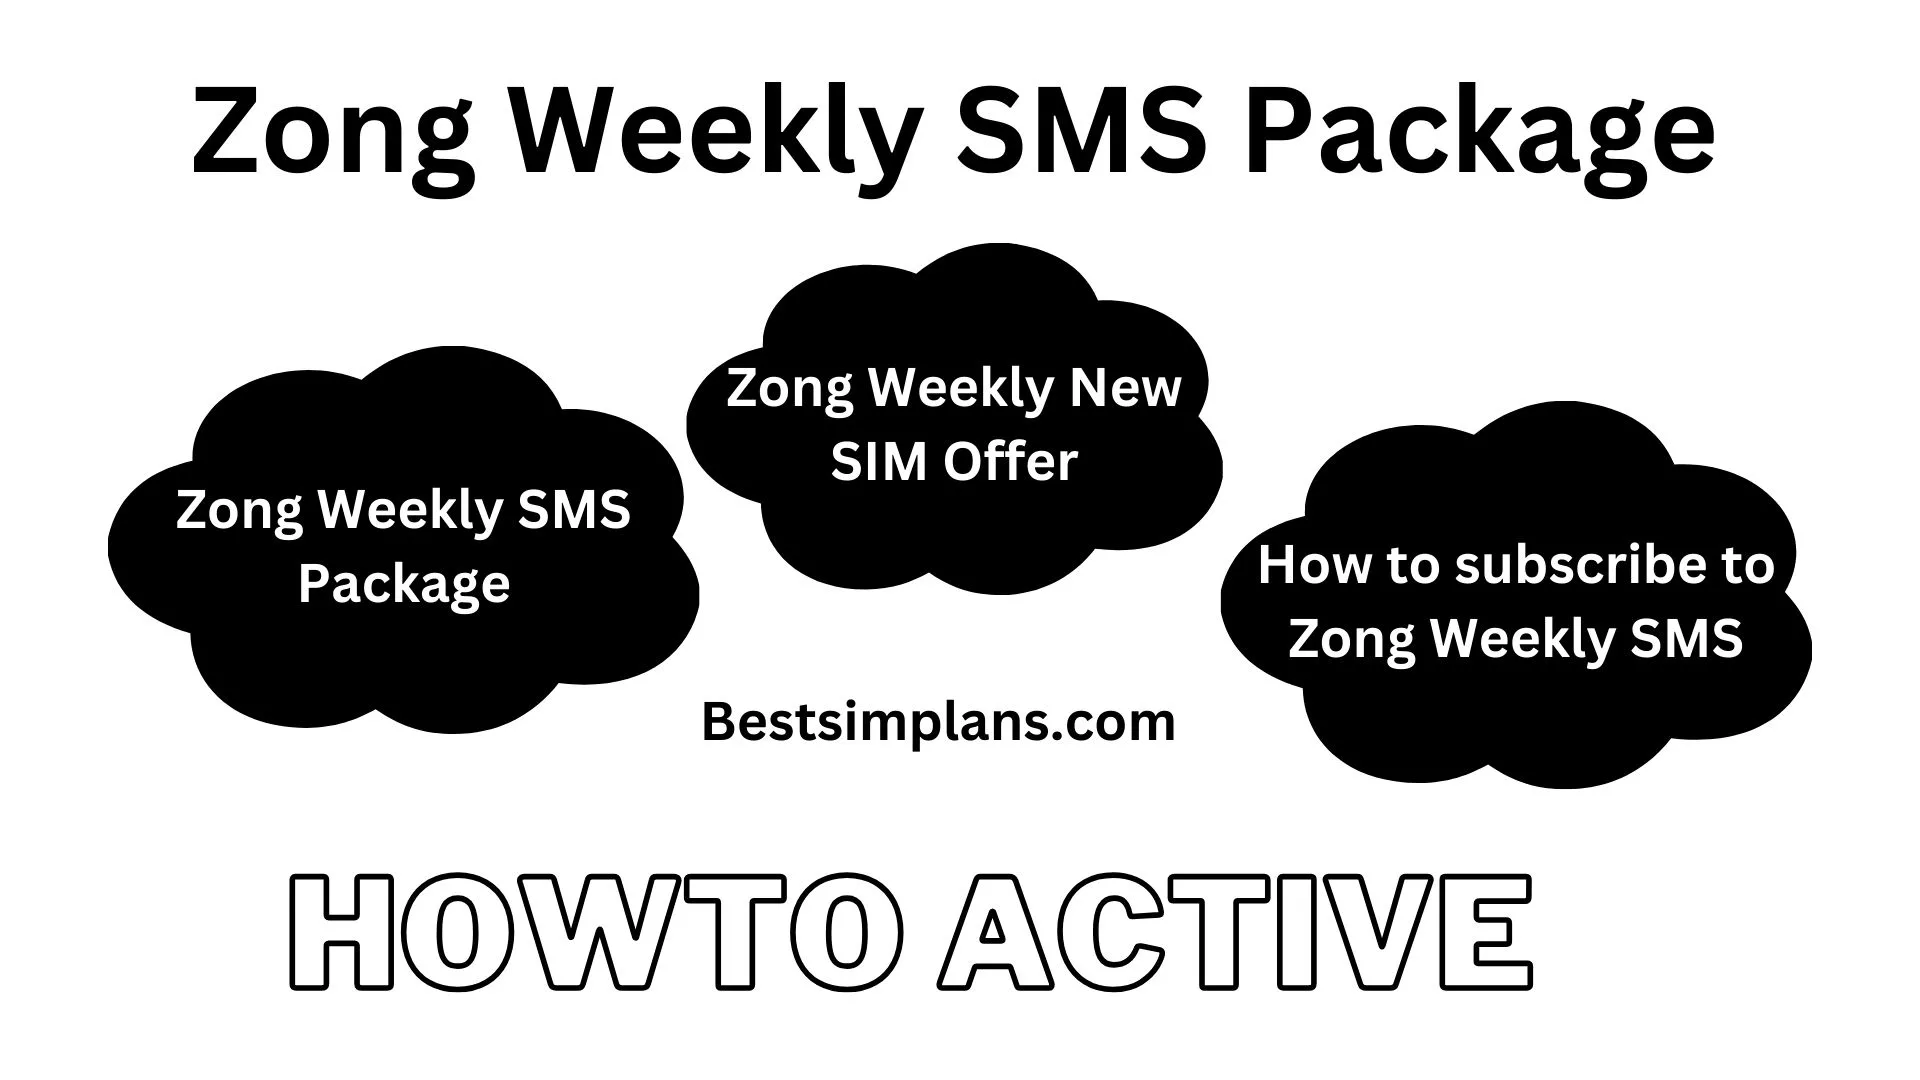 Zong Weekly SMS Package